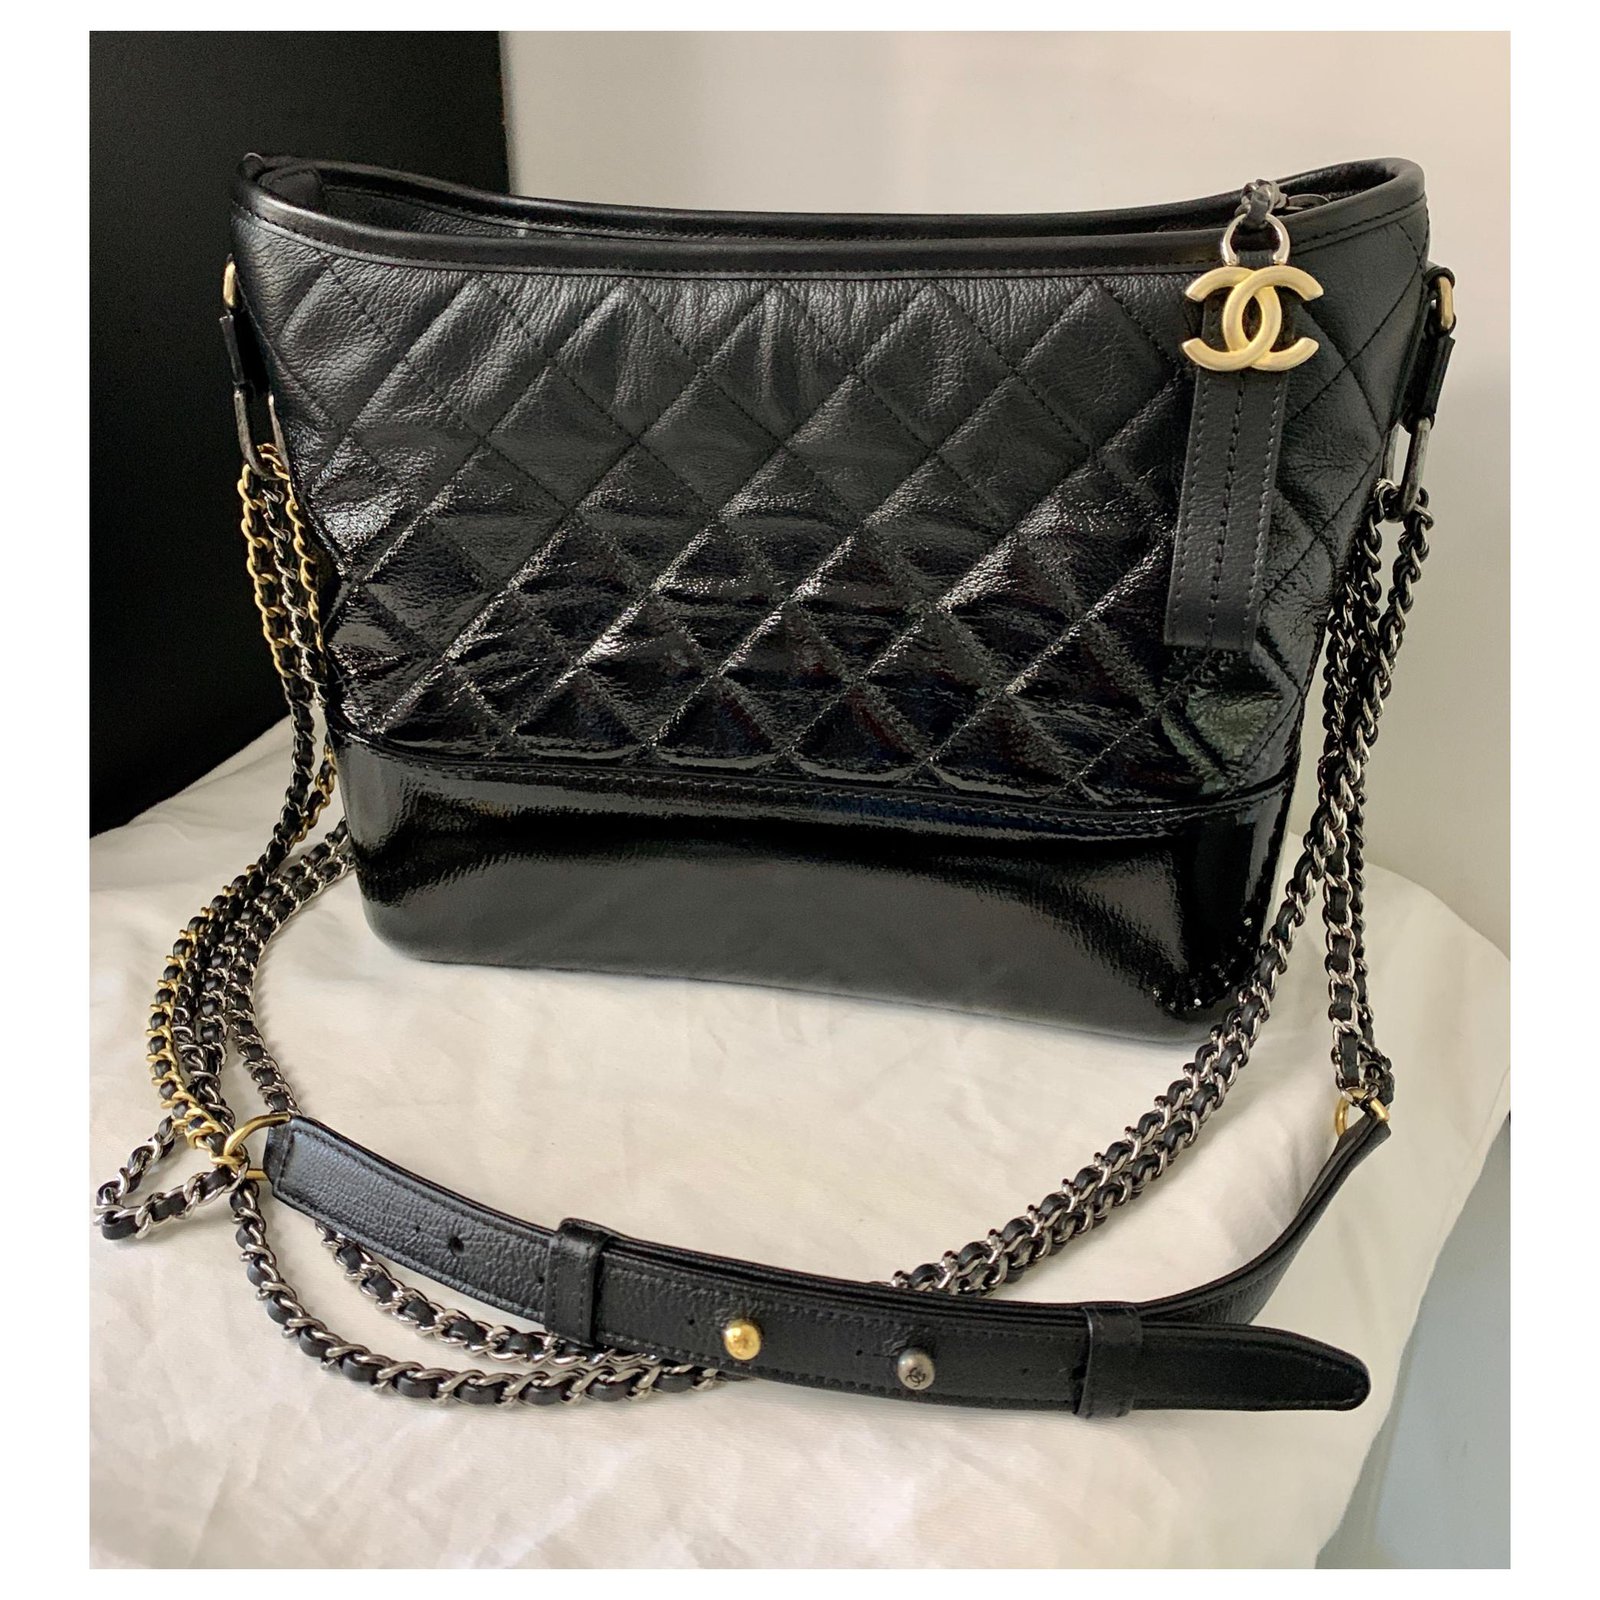 CHANEL bag 'Gabrielle Hobo' in aged black quilted leather - VALOIS VINTAGE  PARIS